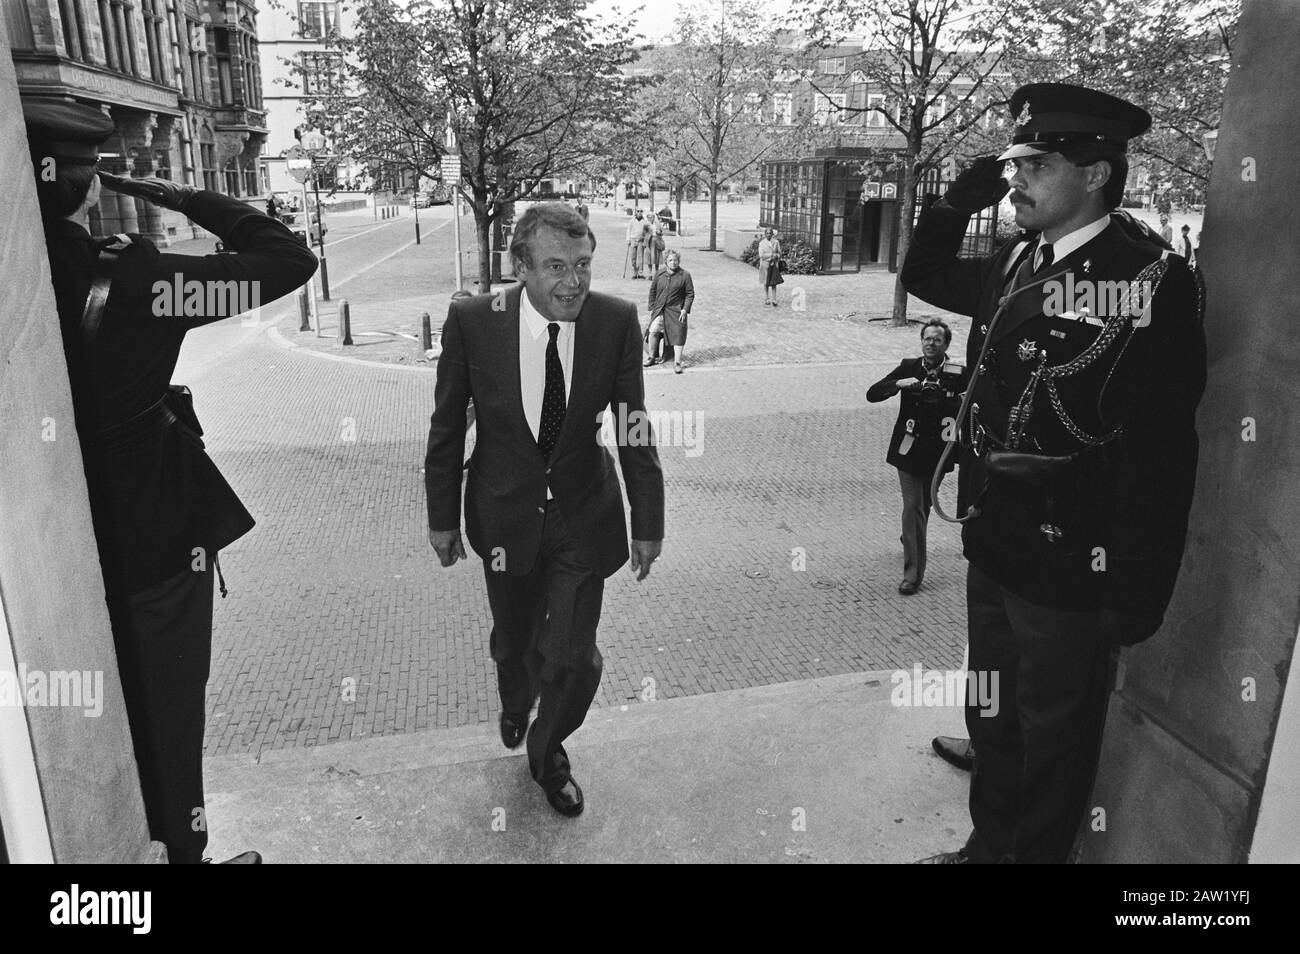 Acquisition of the ministries. Arrival of Hans van Mierlo on the prime minister's residence in The Hague amid saluting military police and a press photographer in the background Annotation: neg.nr. 19 or 20] Date: September 11, 1981 Location: The Hague, South Holland Keywords: military police, ministries, ministers, press photographers Person Name: Mierlo, Hans van Stock Photo